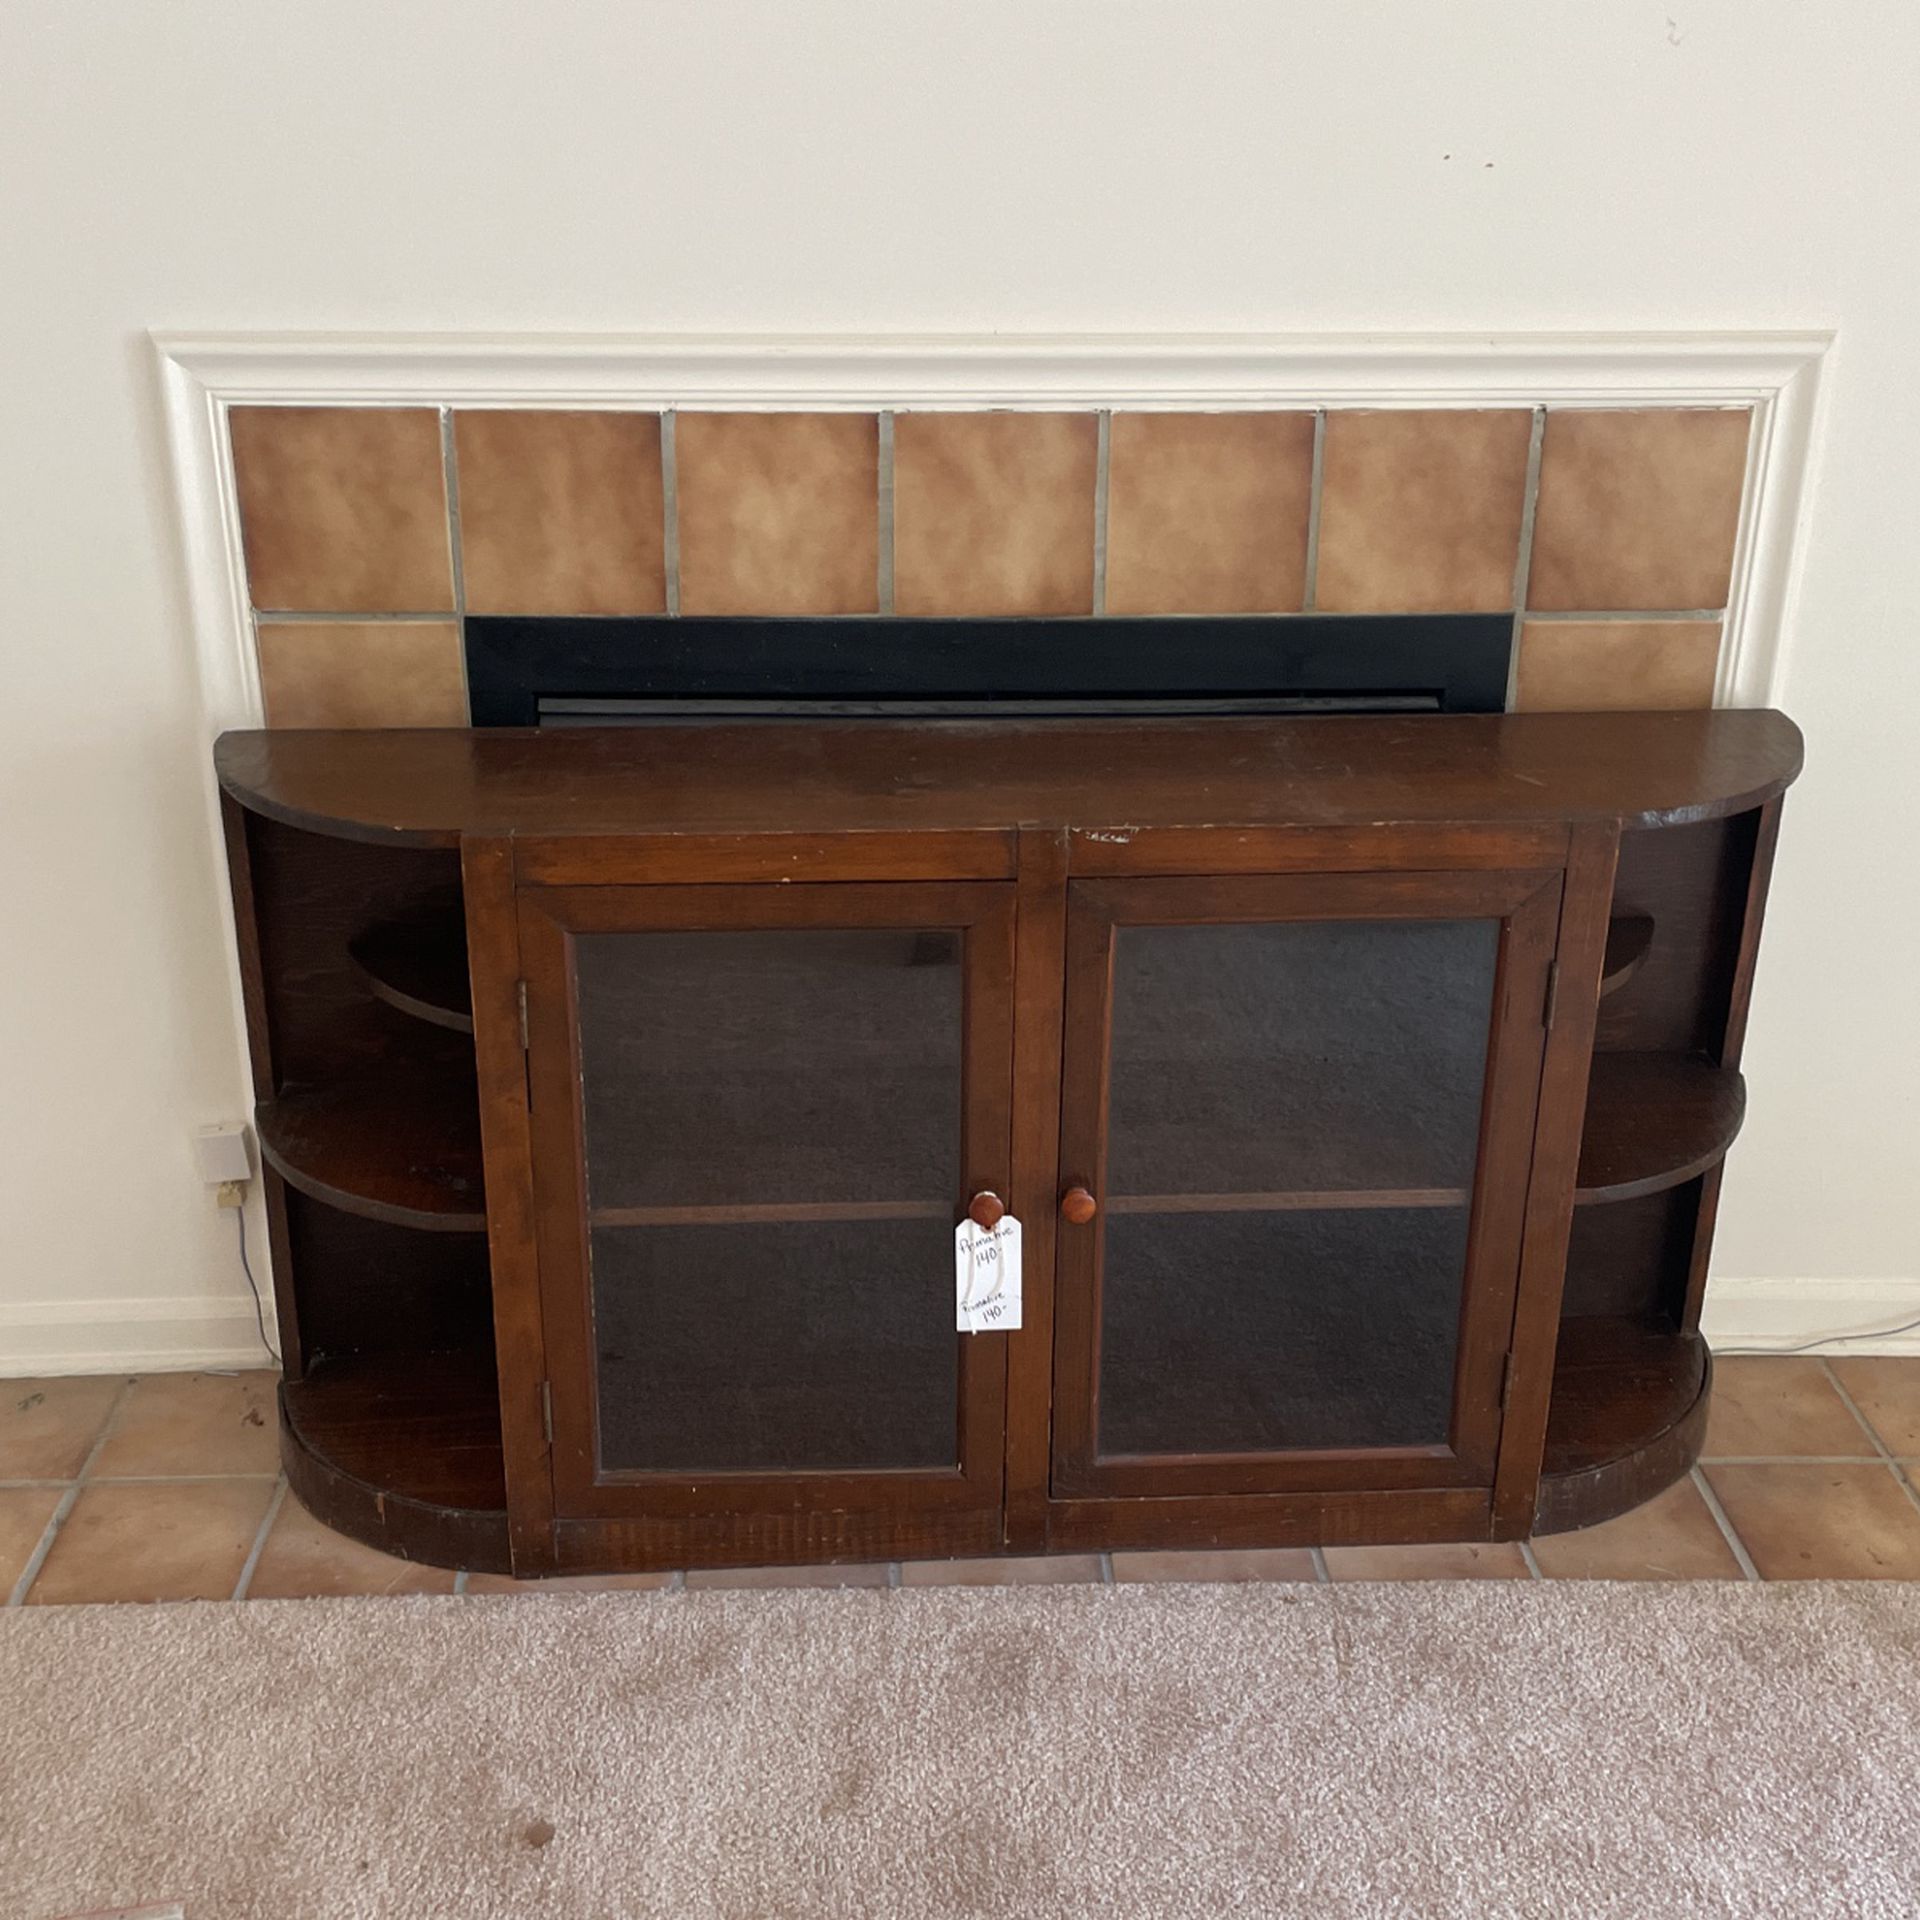 Solid Wood Piece Of Furniture Primative Has Nine Shelves Glass Front Also The Wood